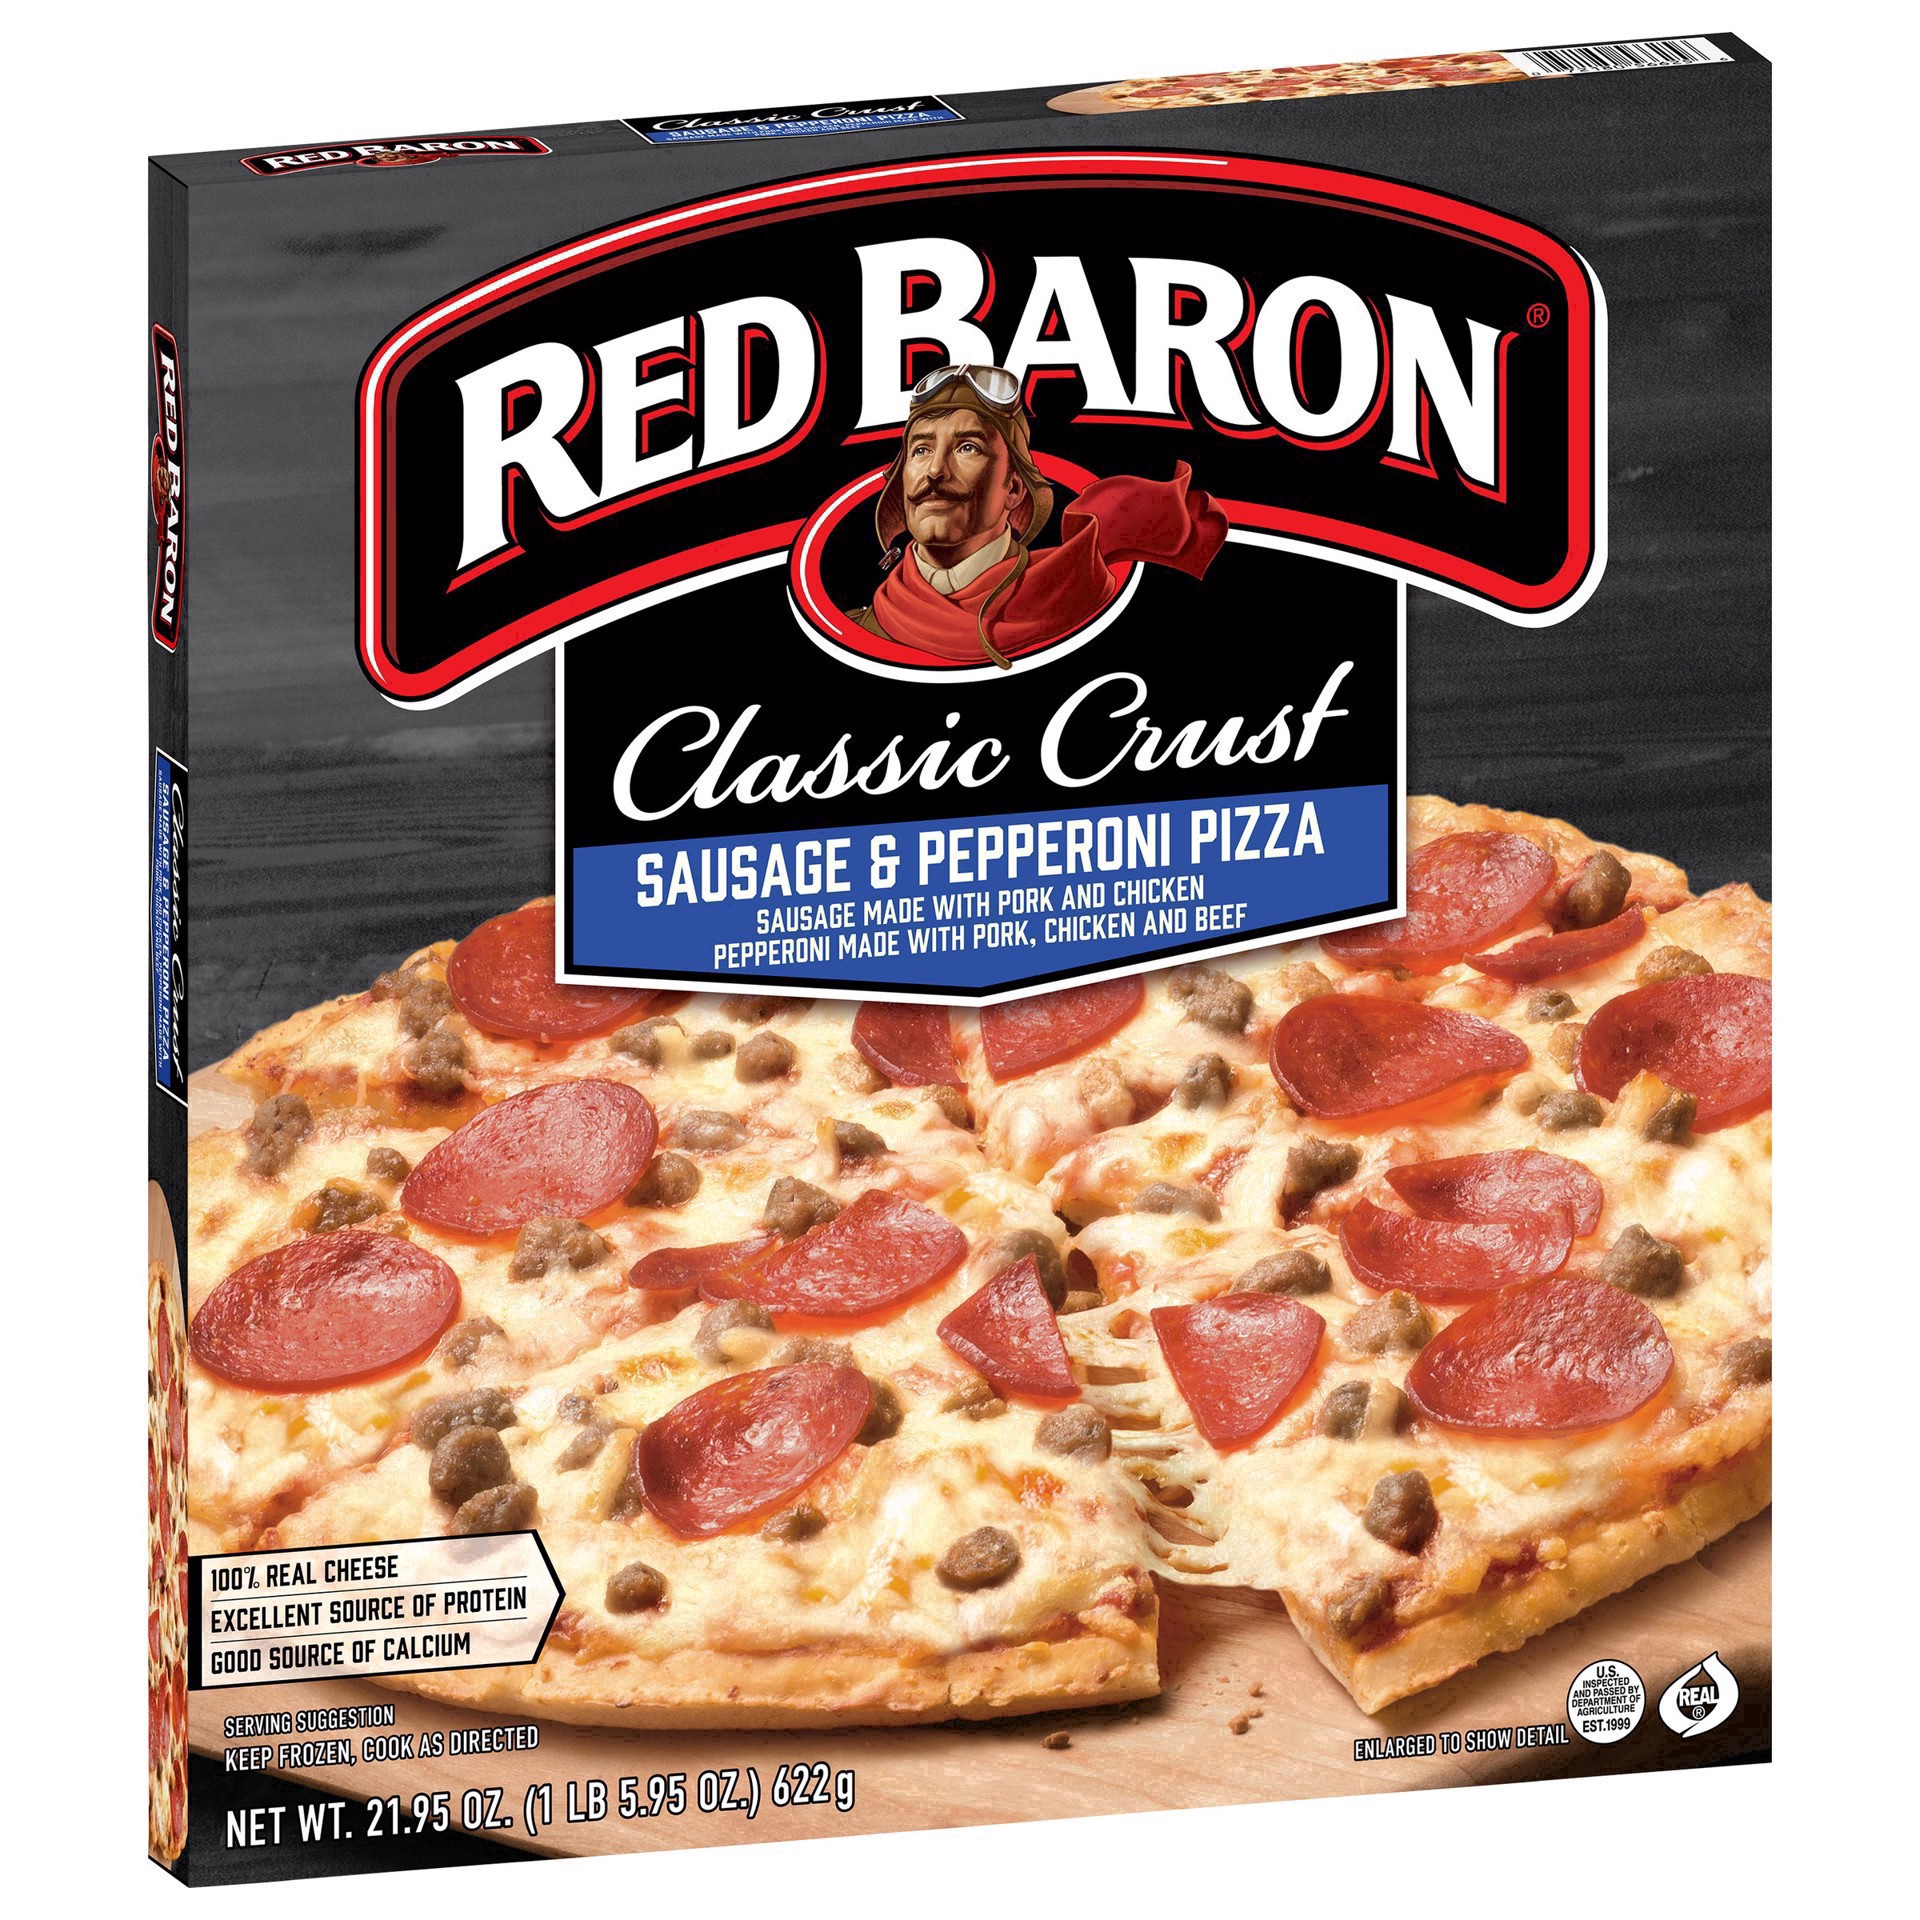 slide 13 of 49, Red Baron Frozen Pizza Classic Crust Sausage & Pepperoni, 21.95 oz